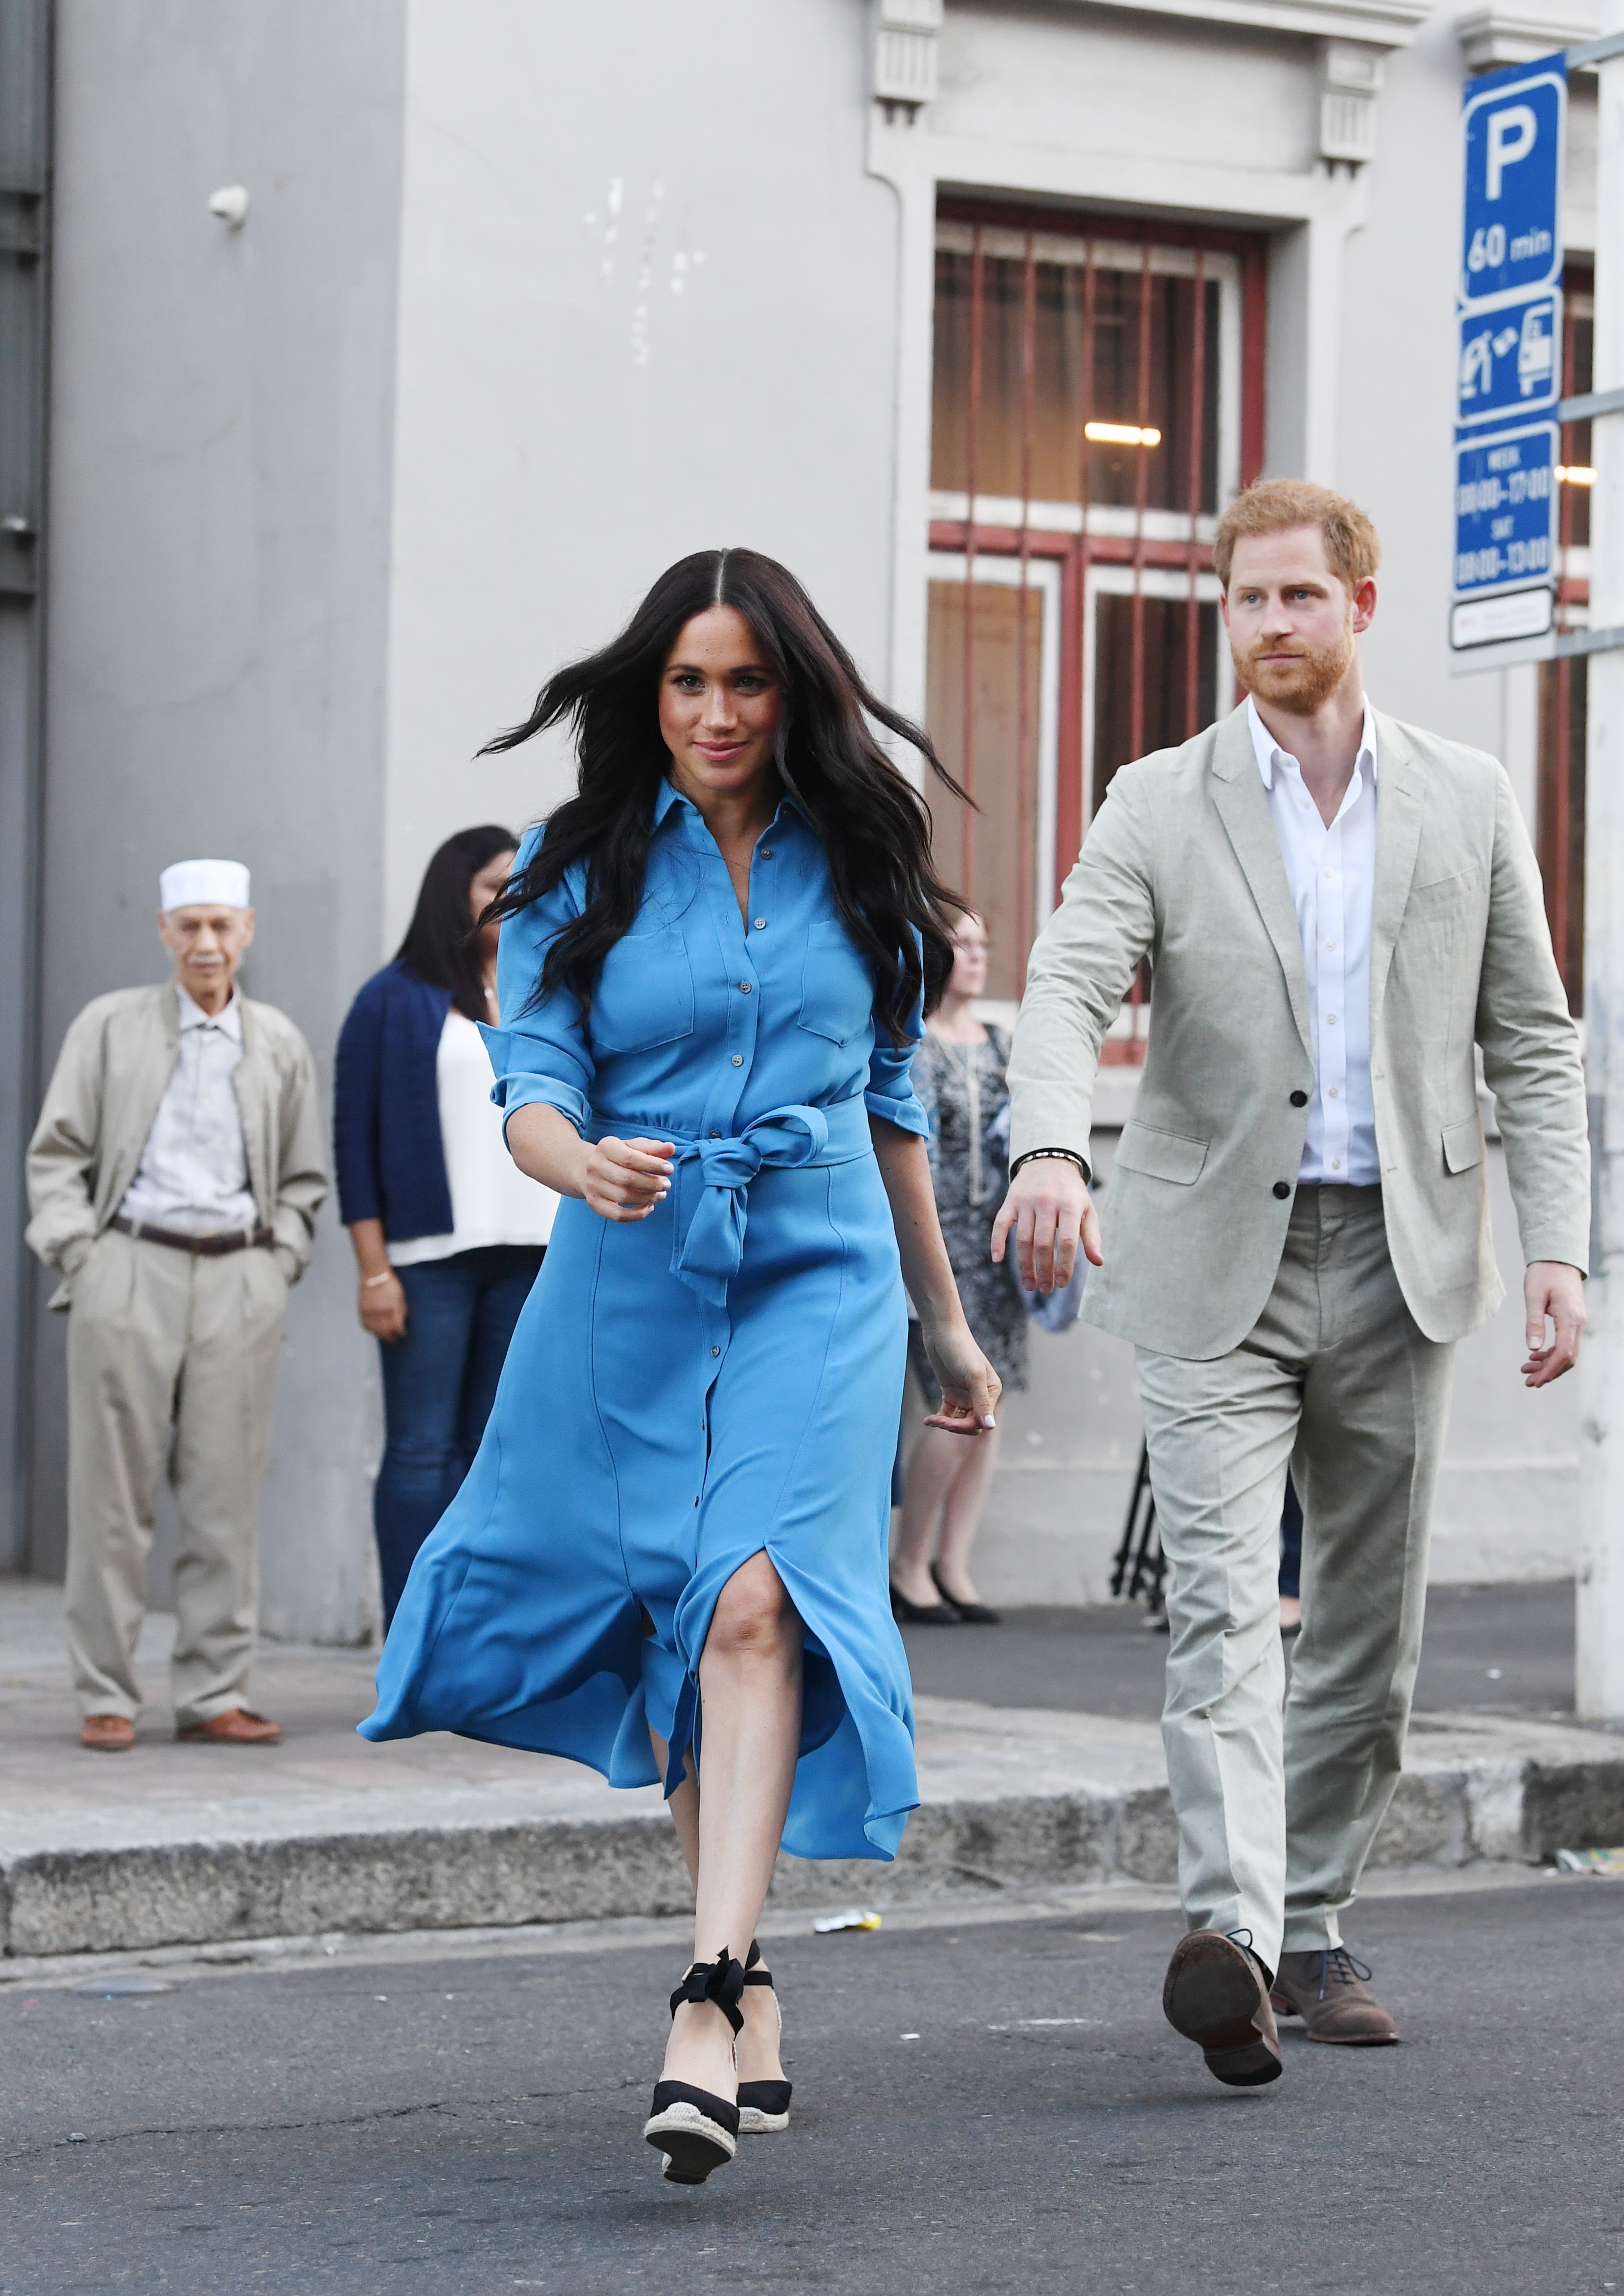 Meghan, Duchess of Sussex and Prince Harry, Duke of Sussex leave after their visit to District 6 Museum on September 23, 2019 | Photo: GettyImages